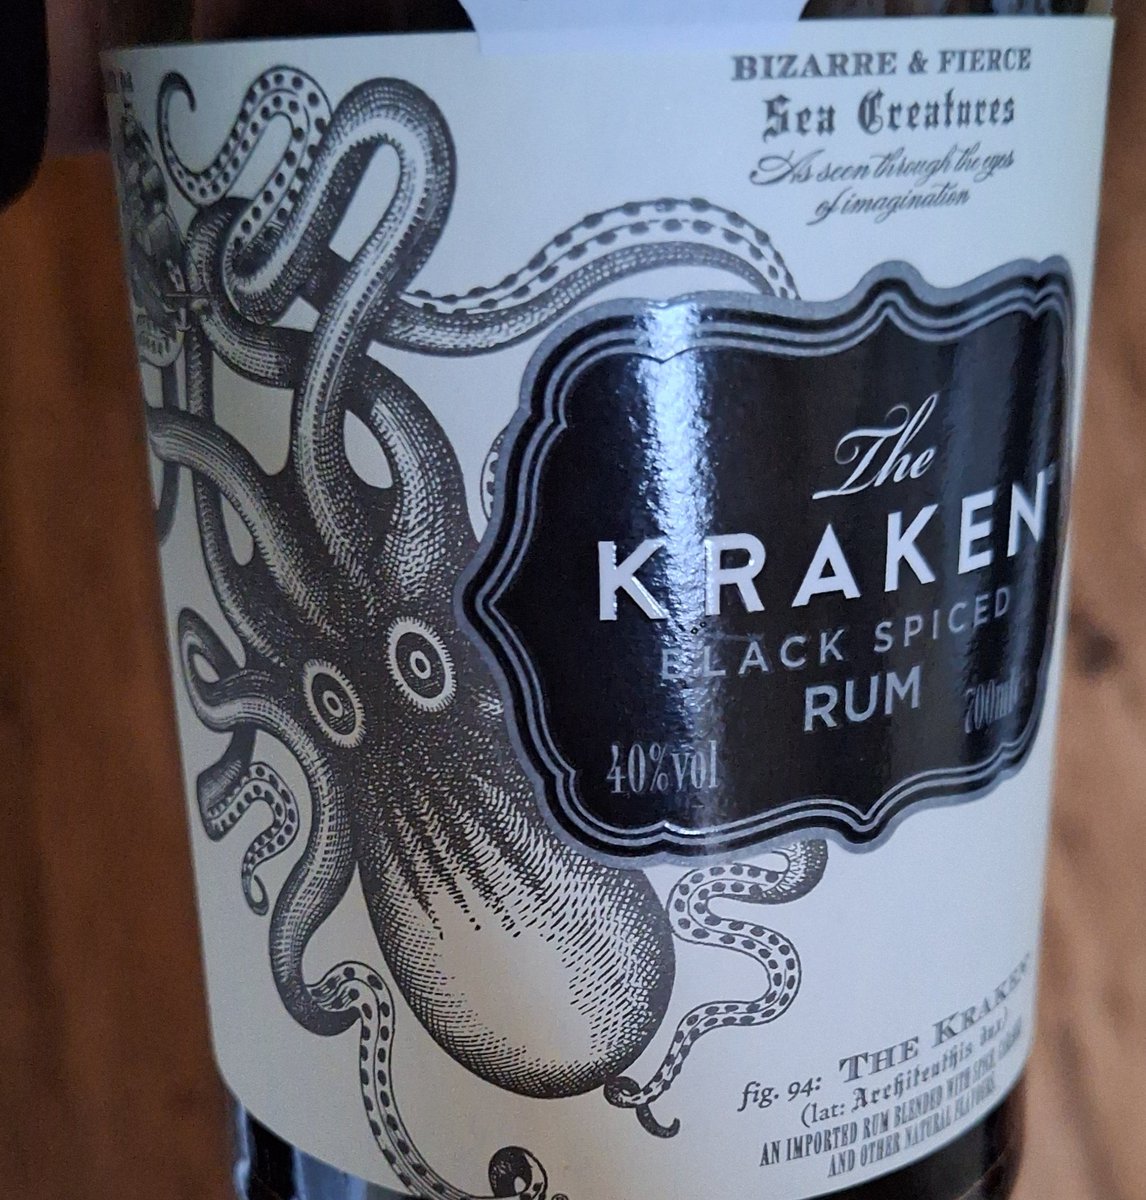 I woke up this morning with a KRAKEN in my kitchen. I dont know where it came from or how it got in, but it was strong enough to put my menchildren in a semi coma. 😂😂😂😂 #TheProofIsOutThere